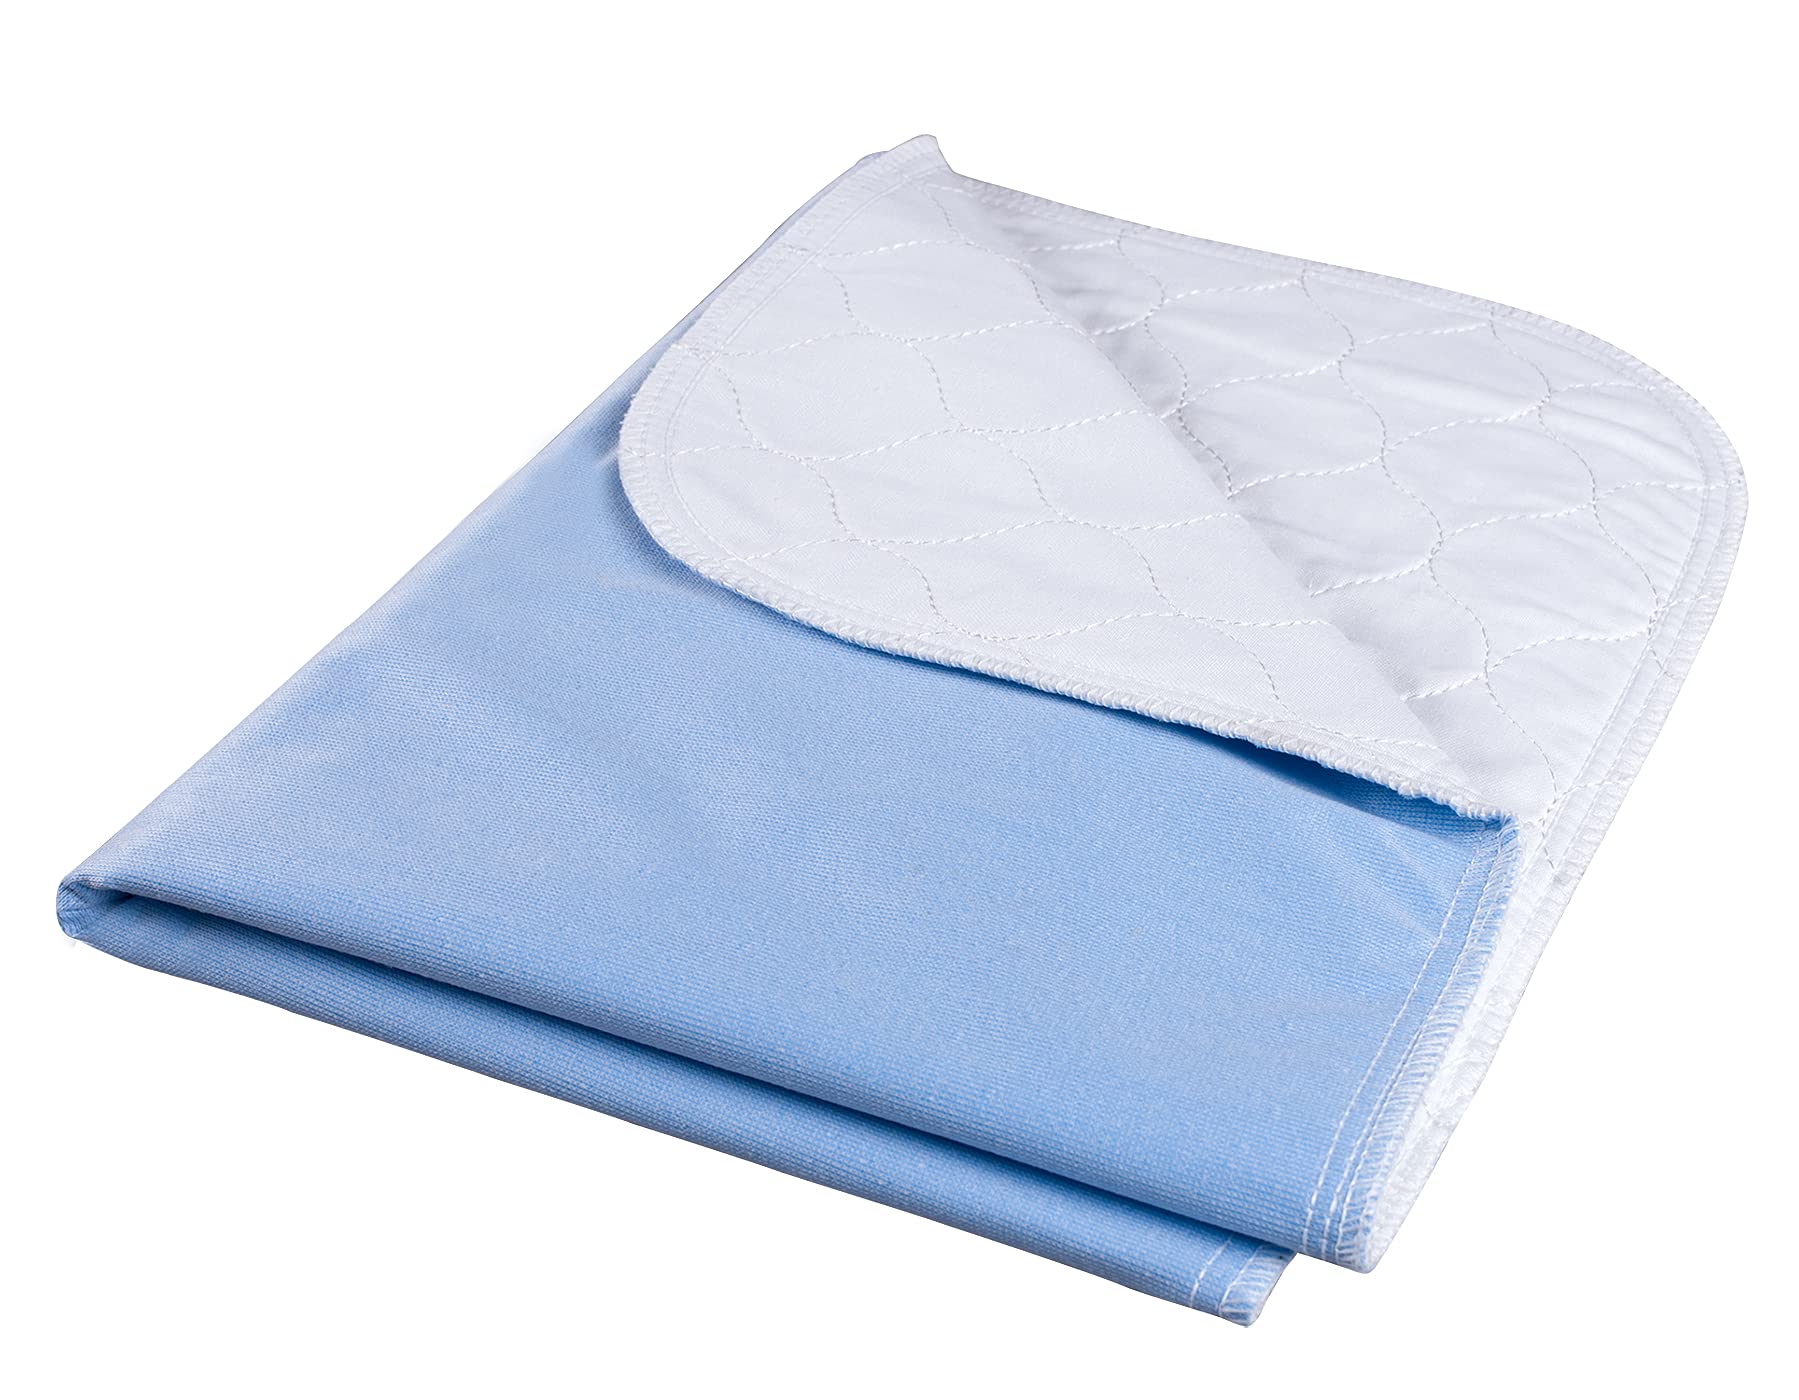  Incontinence Bed Pads Washable - Reusable Waterproof Bed Pads -  Soft and Leak Proof Chucks - Moderate Absorbent Pee Pads for Adults -  Withstands Extensive Washing - 24 x 36 - 1 Pack : Health & Household